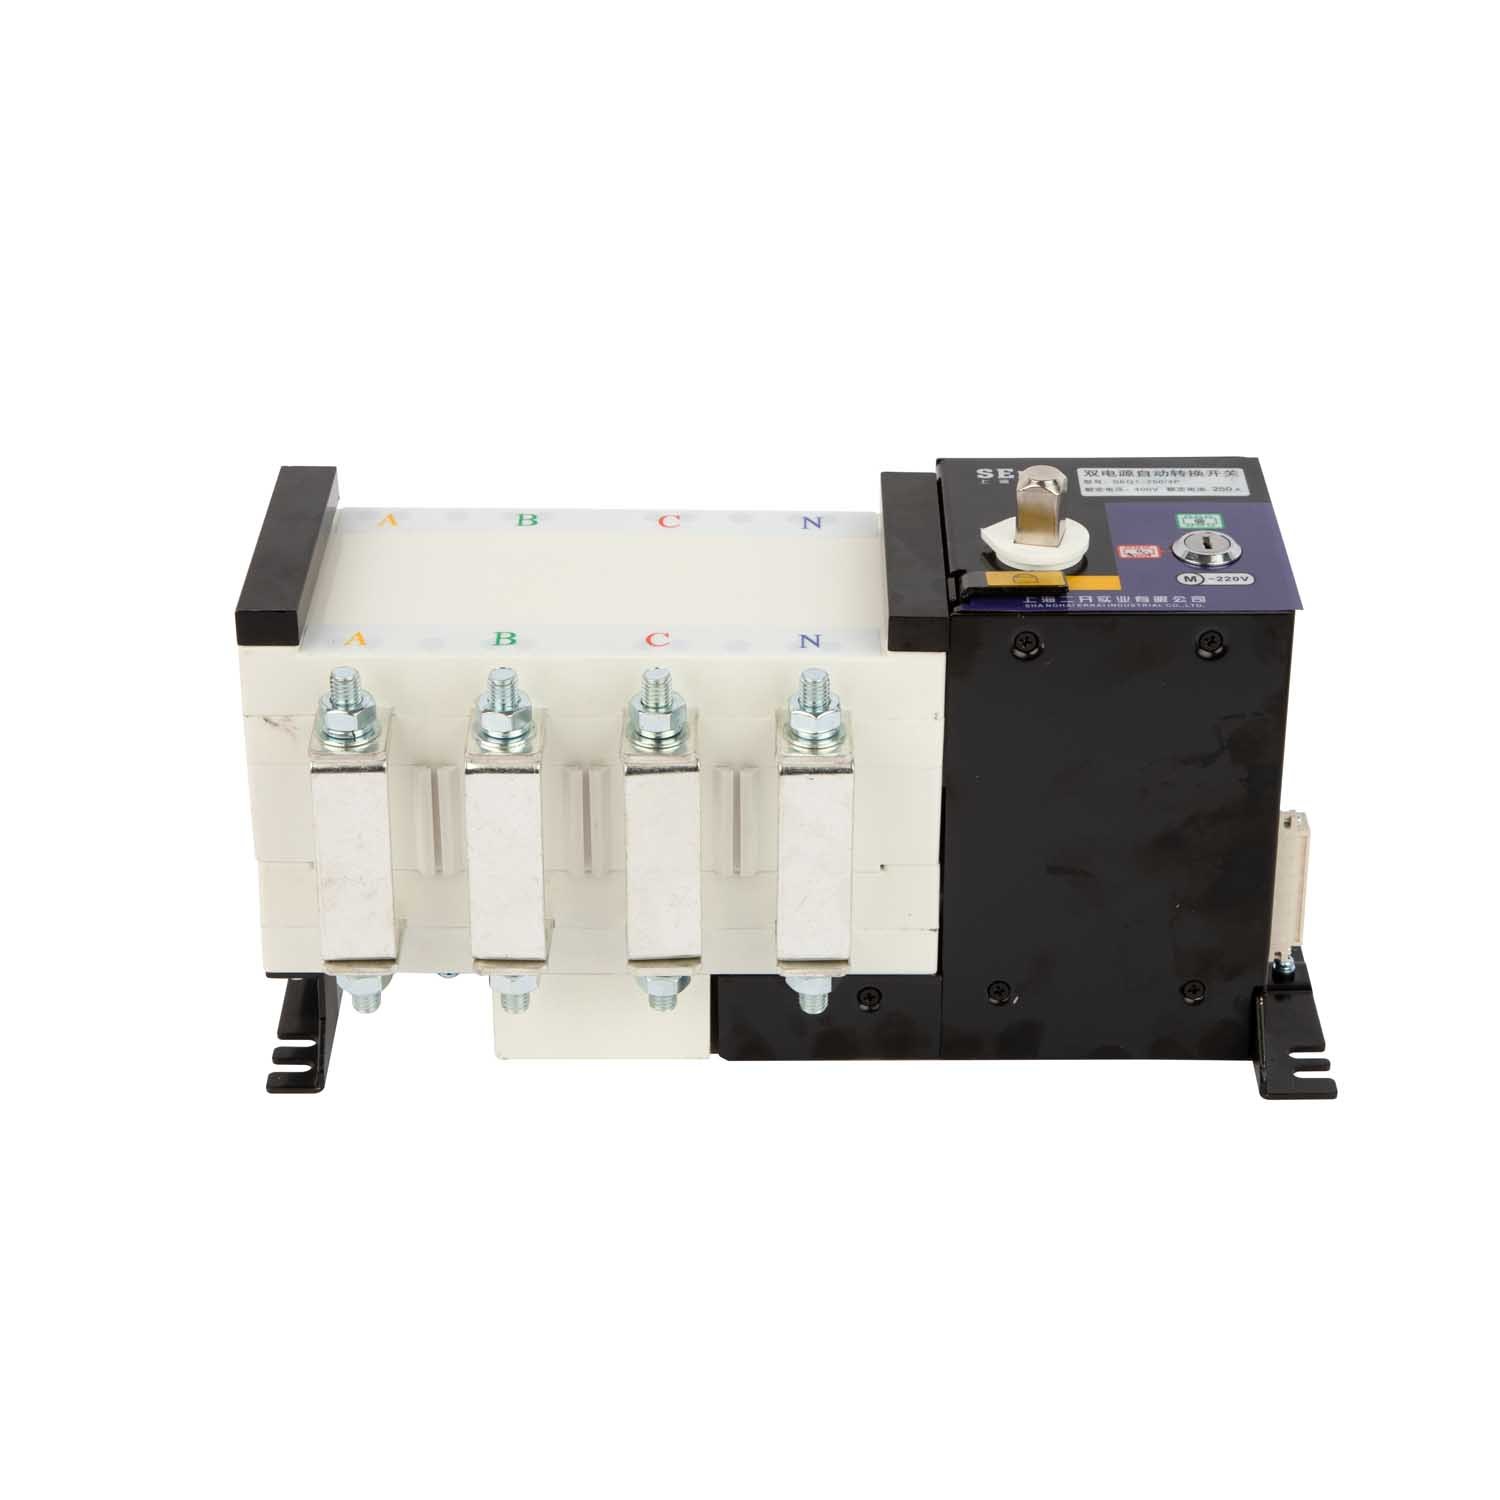 Uvq1-160A 3p ATS 400V 50Hz ATS Self Return Electric Automatic Transfer Switch with Fire Control